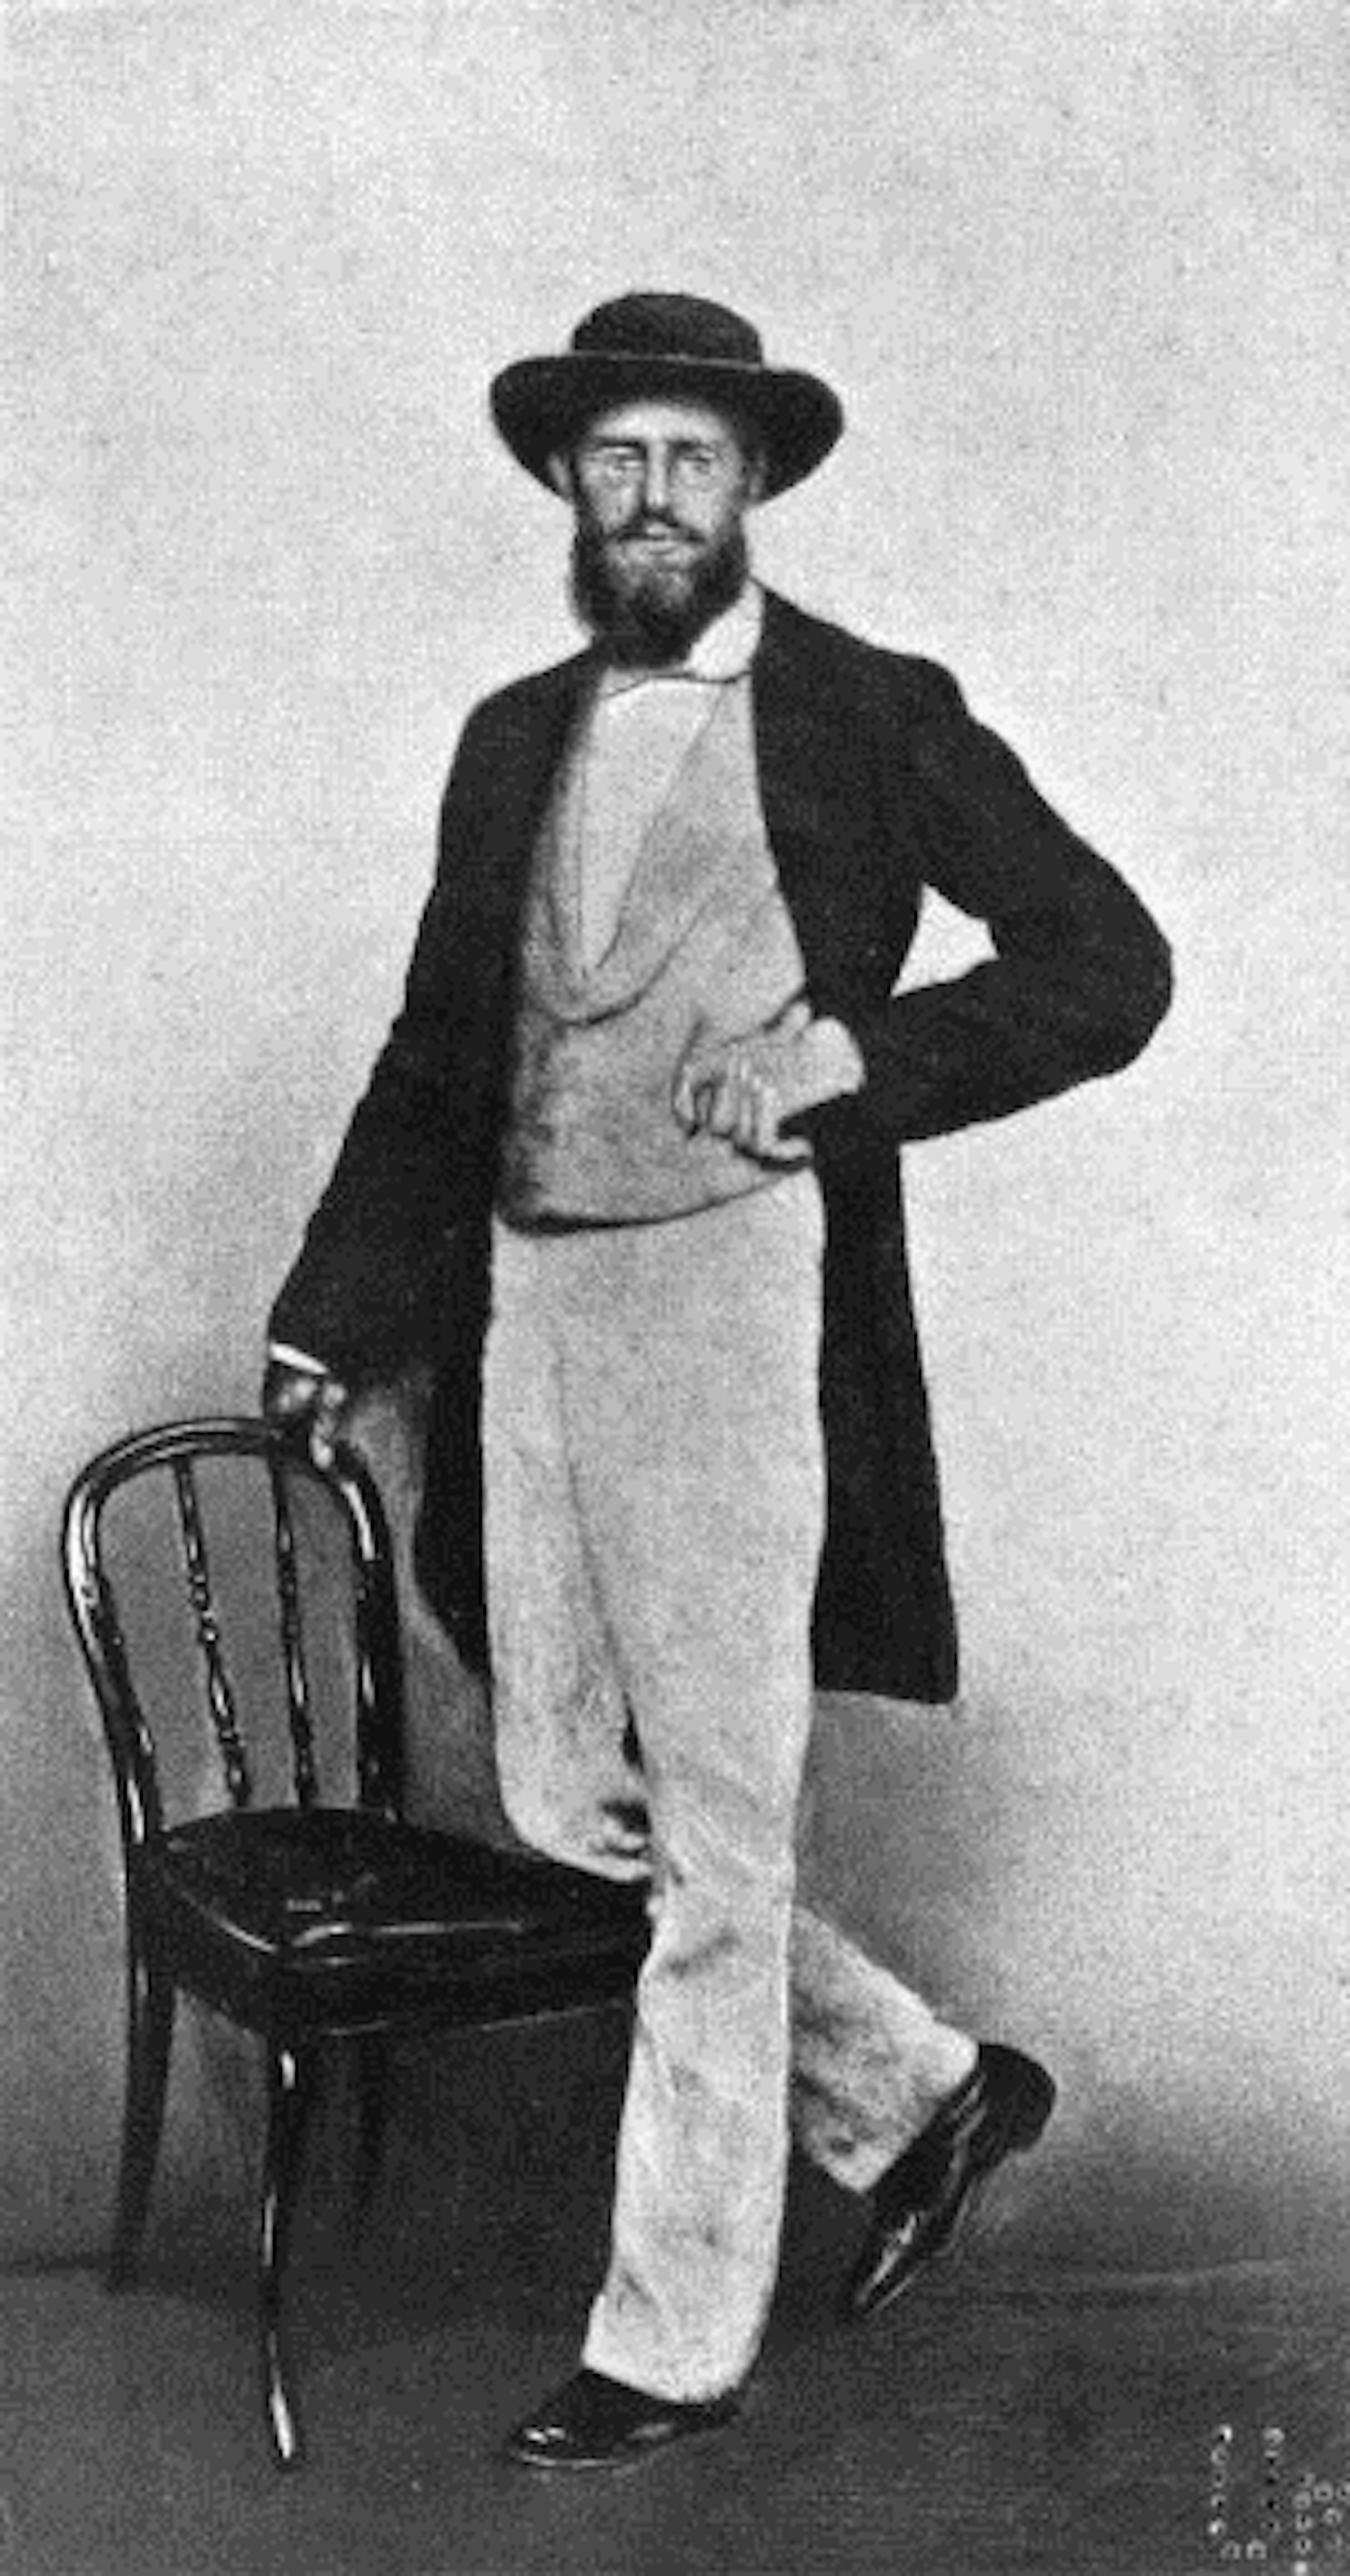 young alfred russel wallace